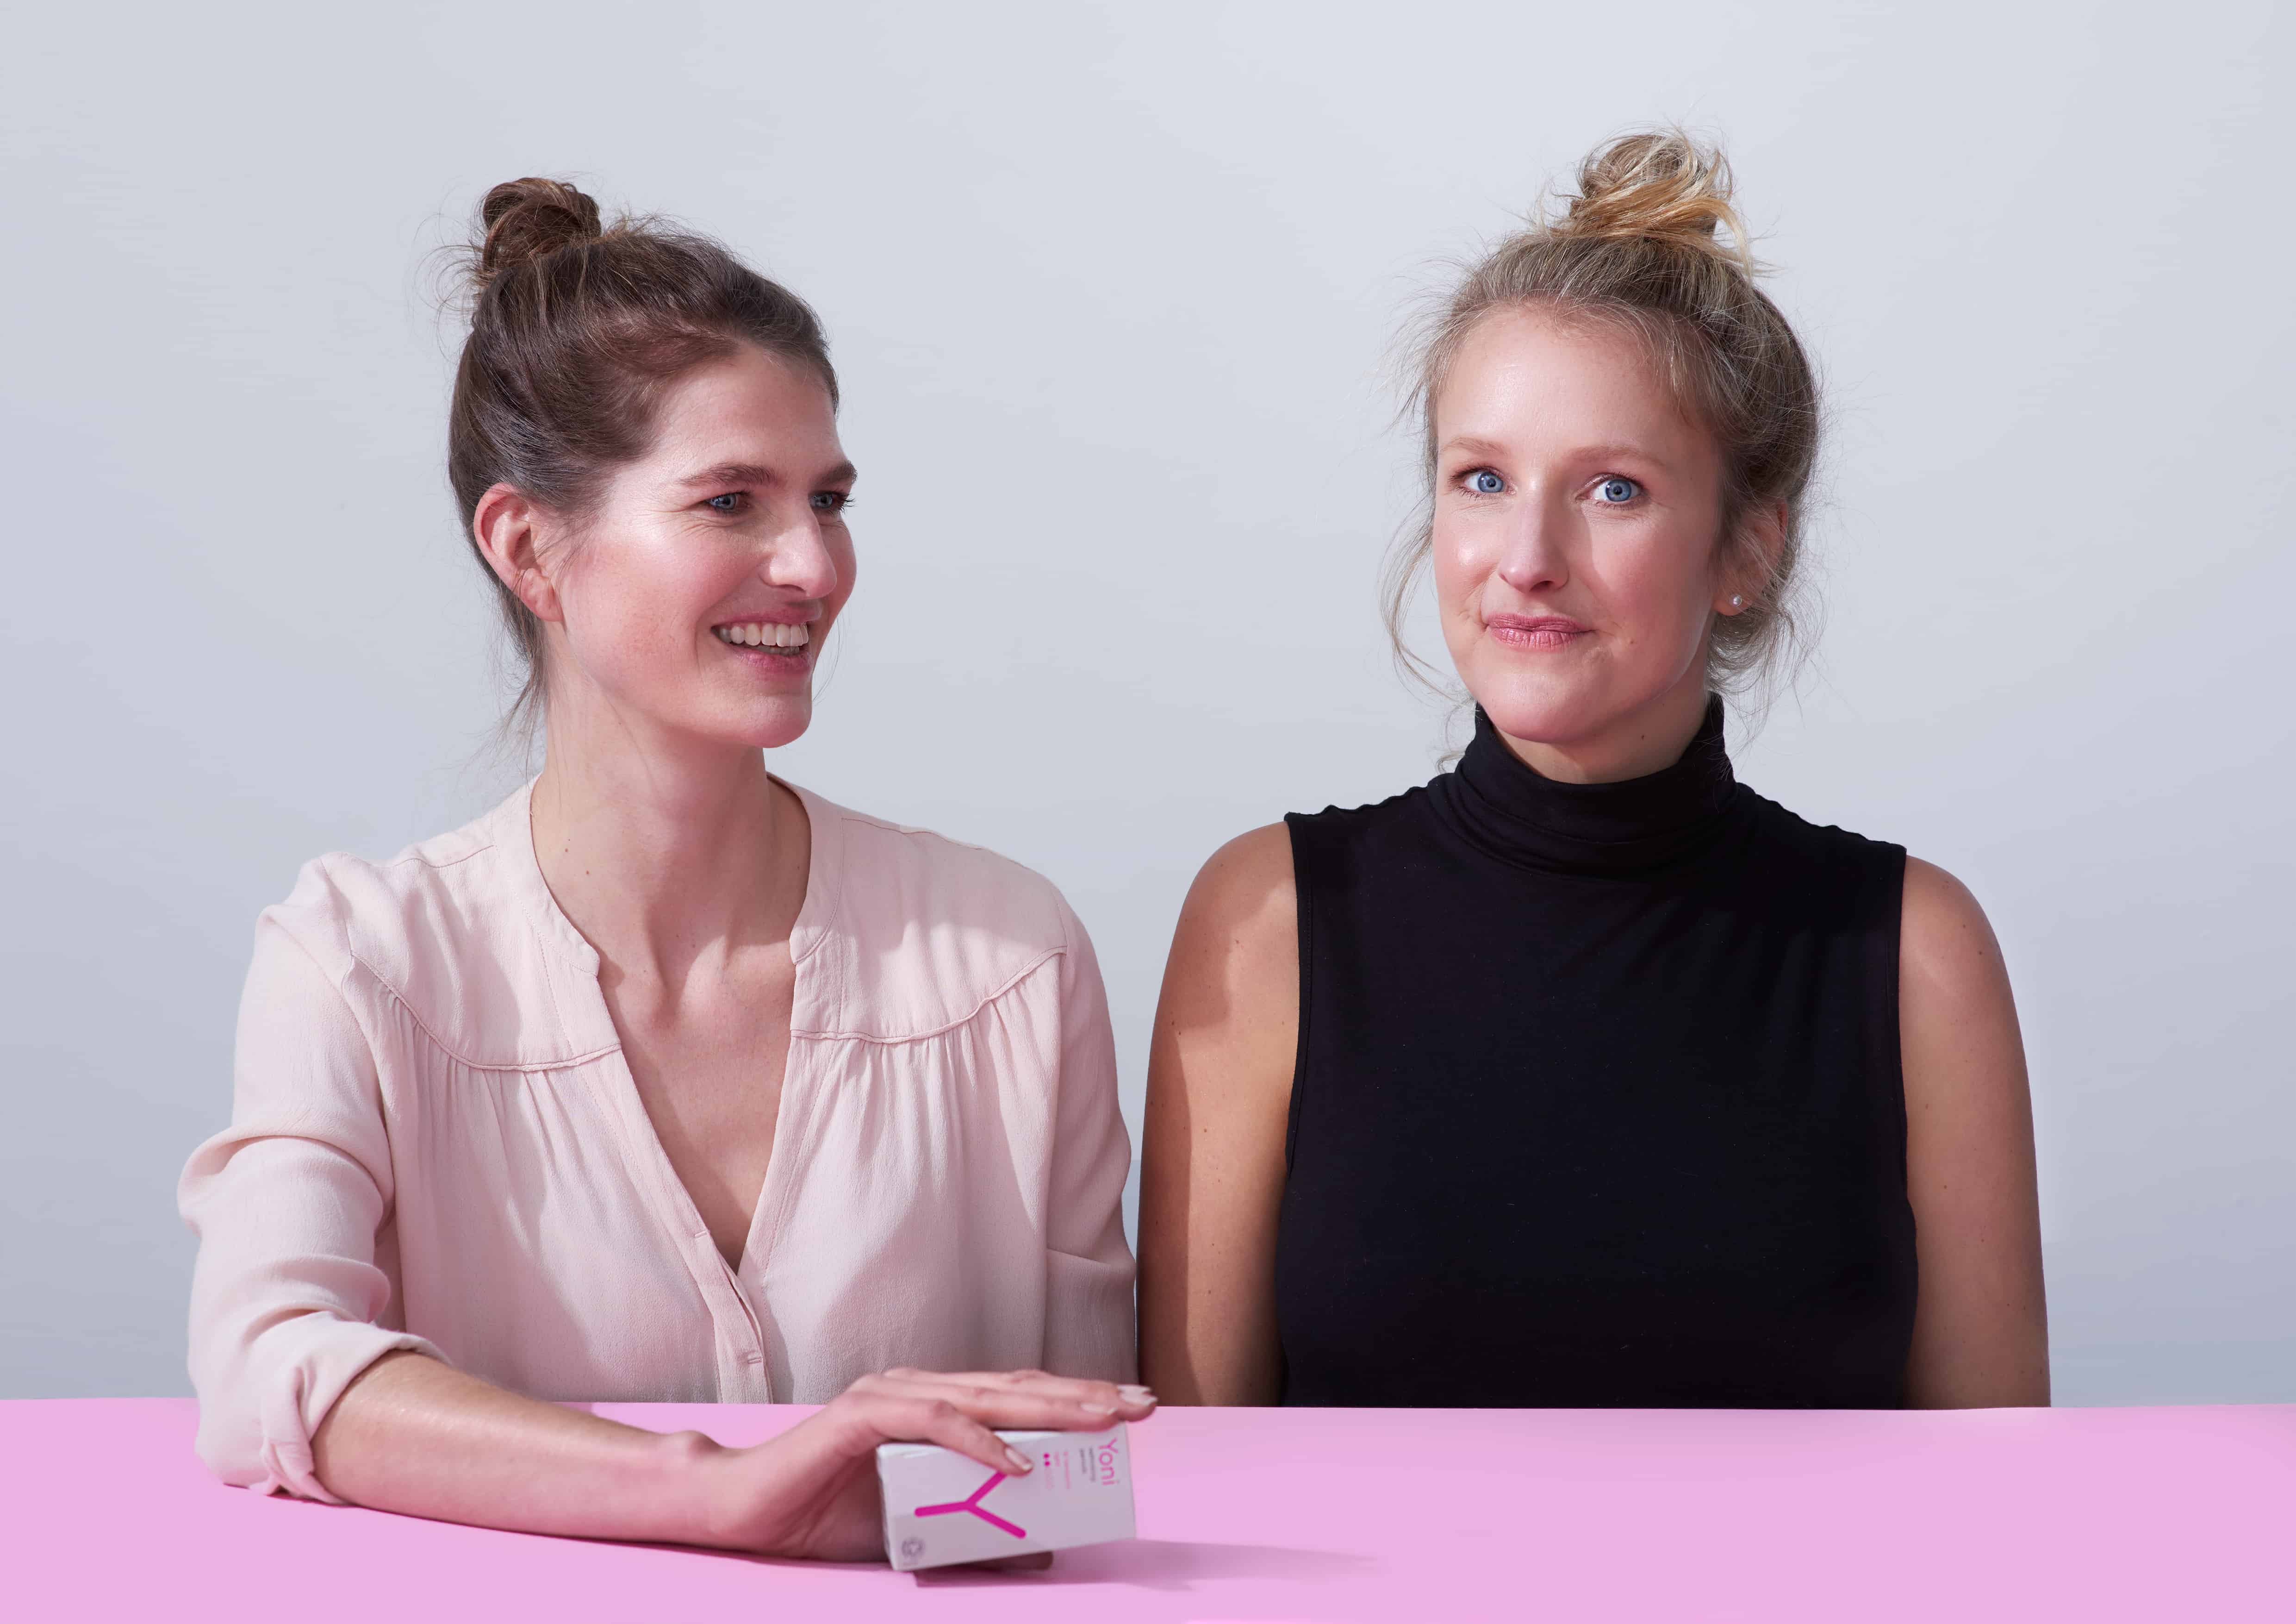 Yoni co-founders Mariah Mansvelt-Beck and Wendelien Hebly